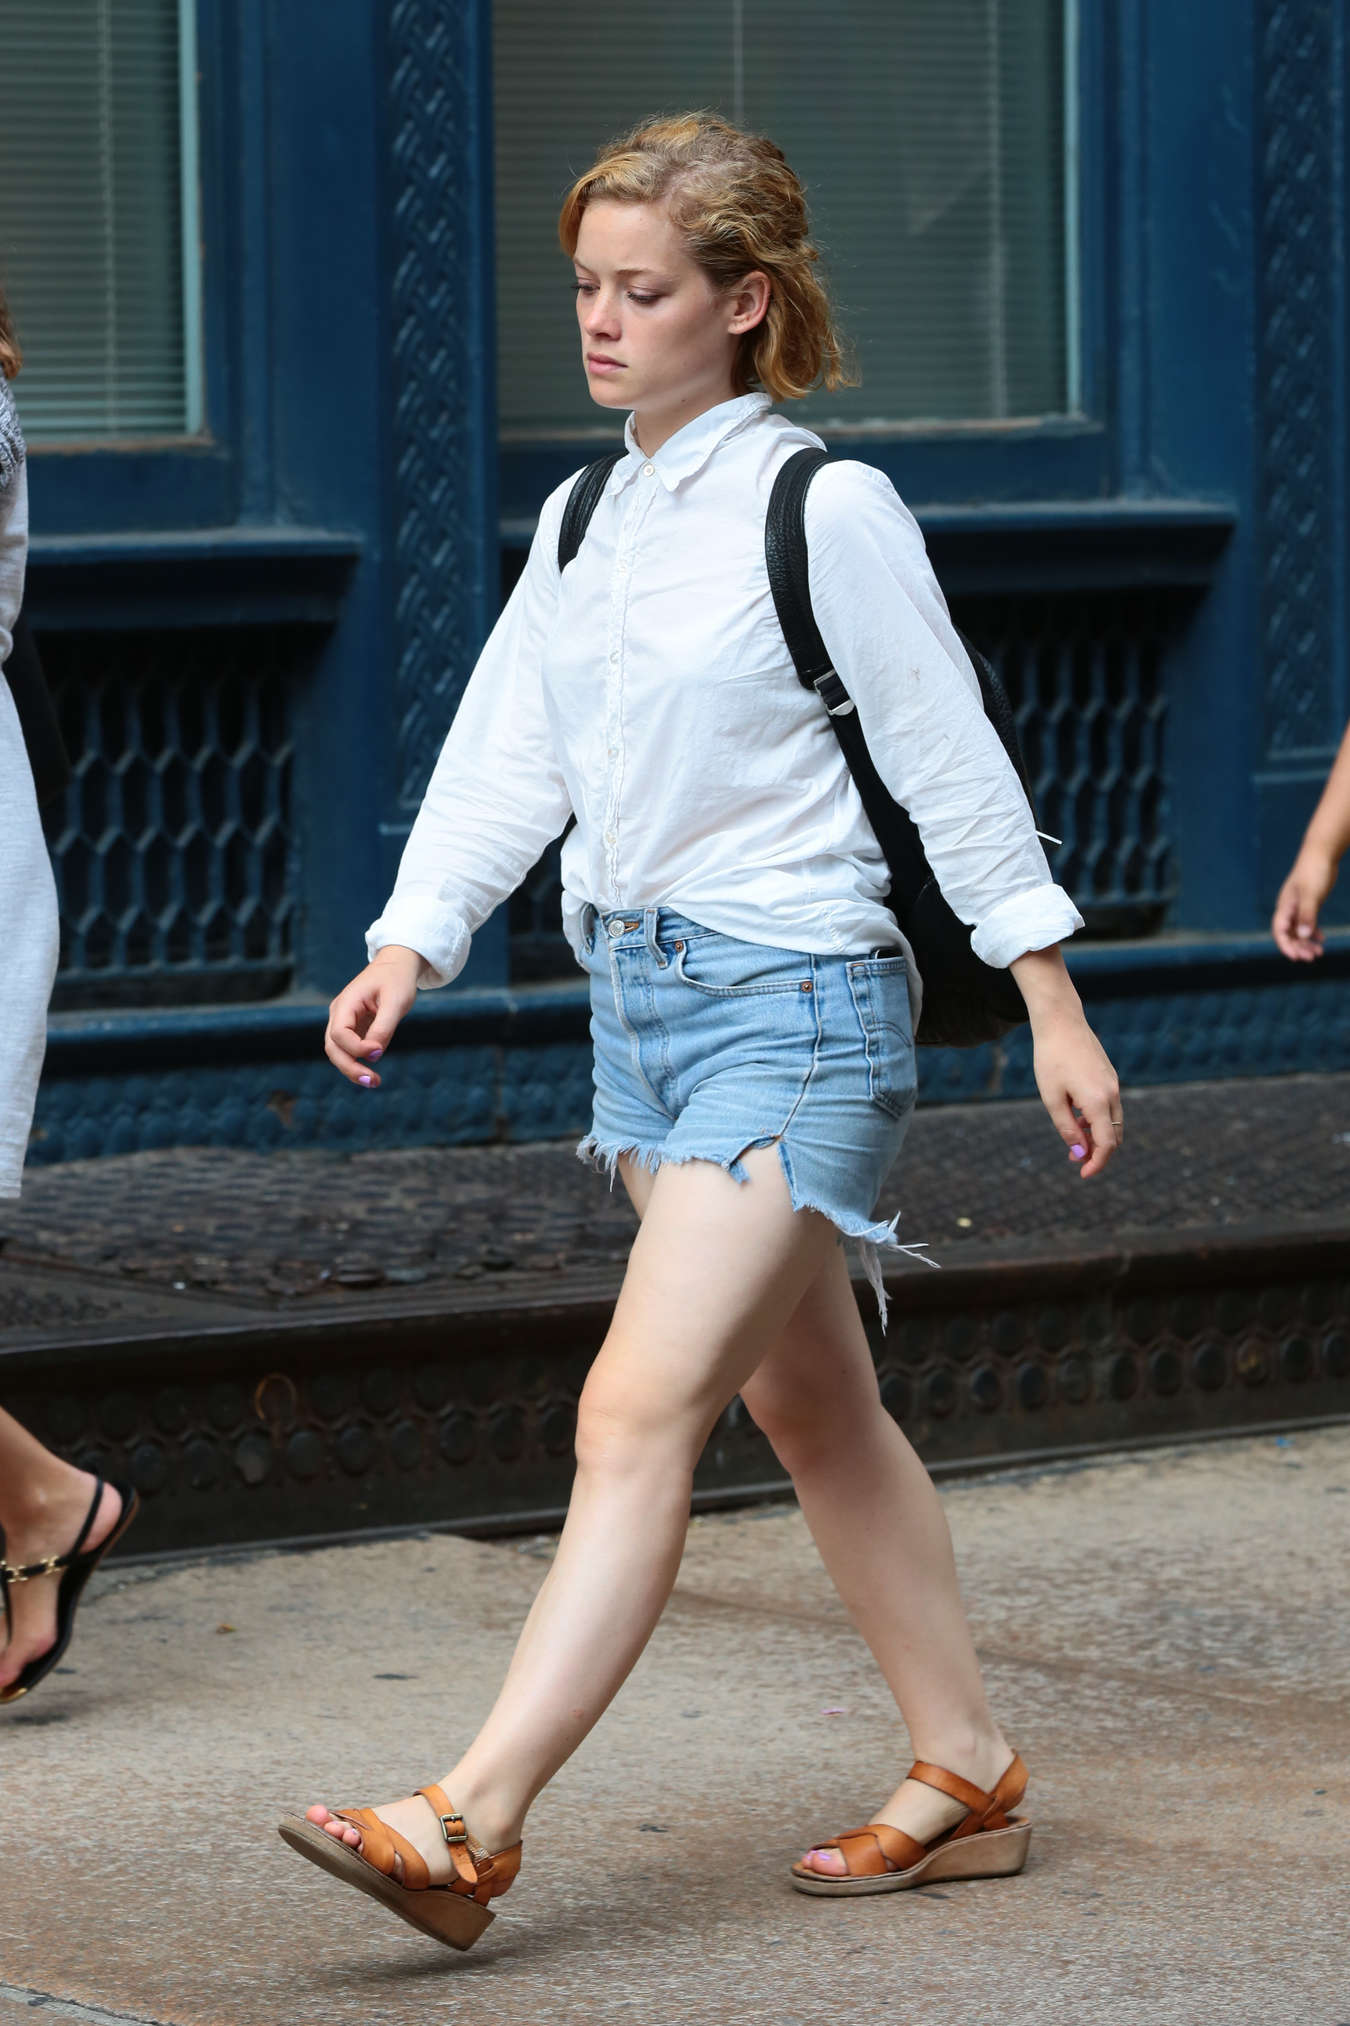 Jane Levy 2014 : Jane Levy - Seen out in NY -02. 